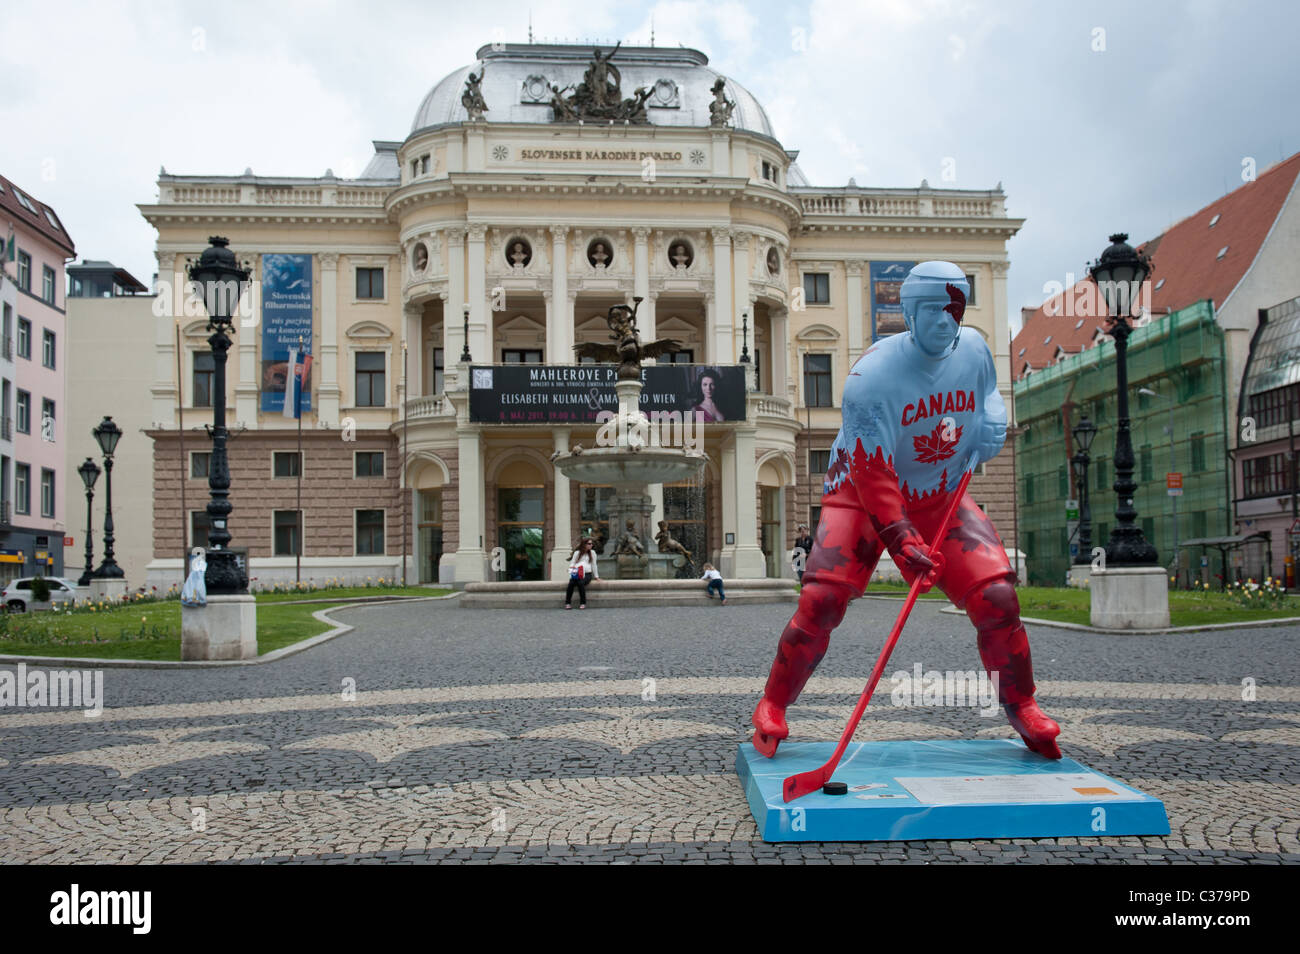 Statue of Canadian hockey player placed in front of Slovak National Theater during hockey championships 2011 in Slovakia Stock Photo